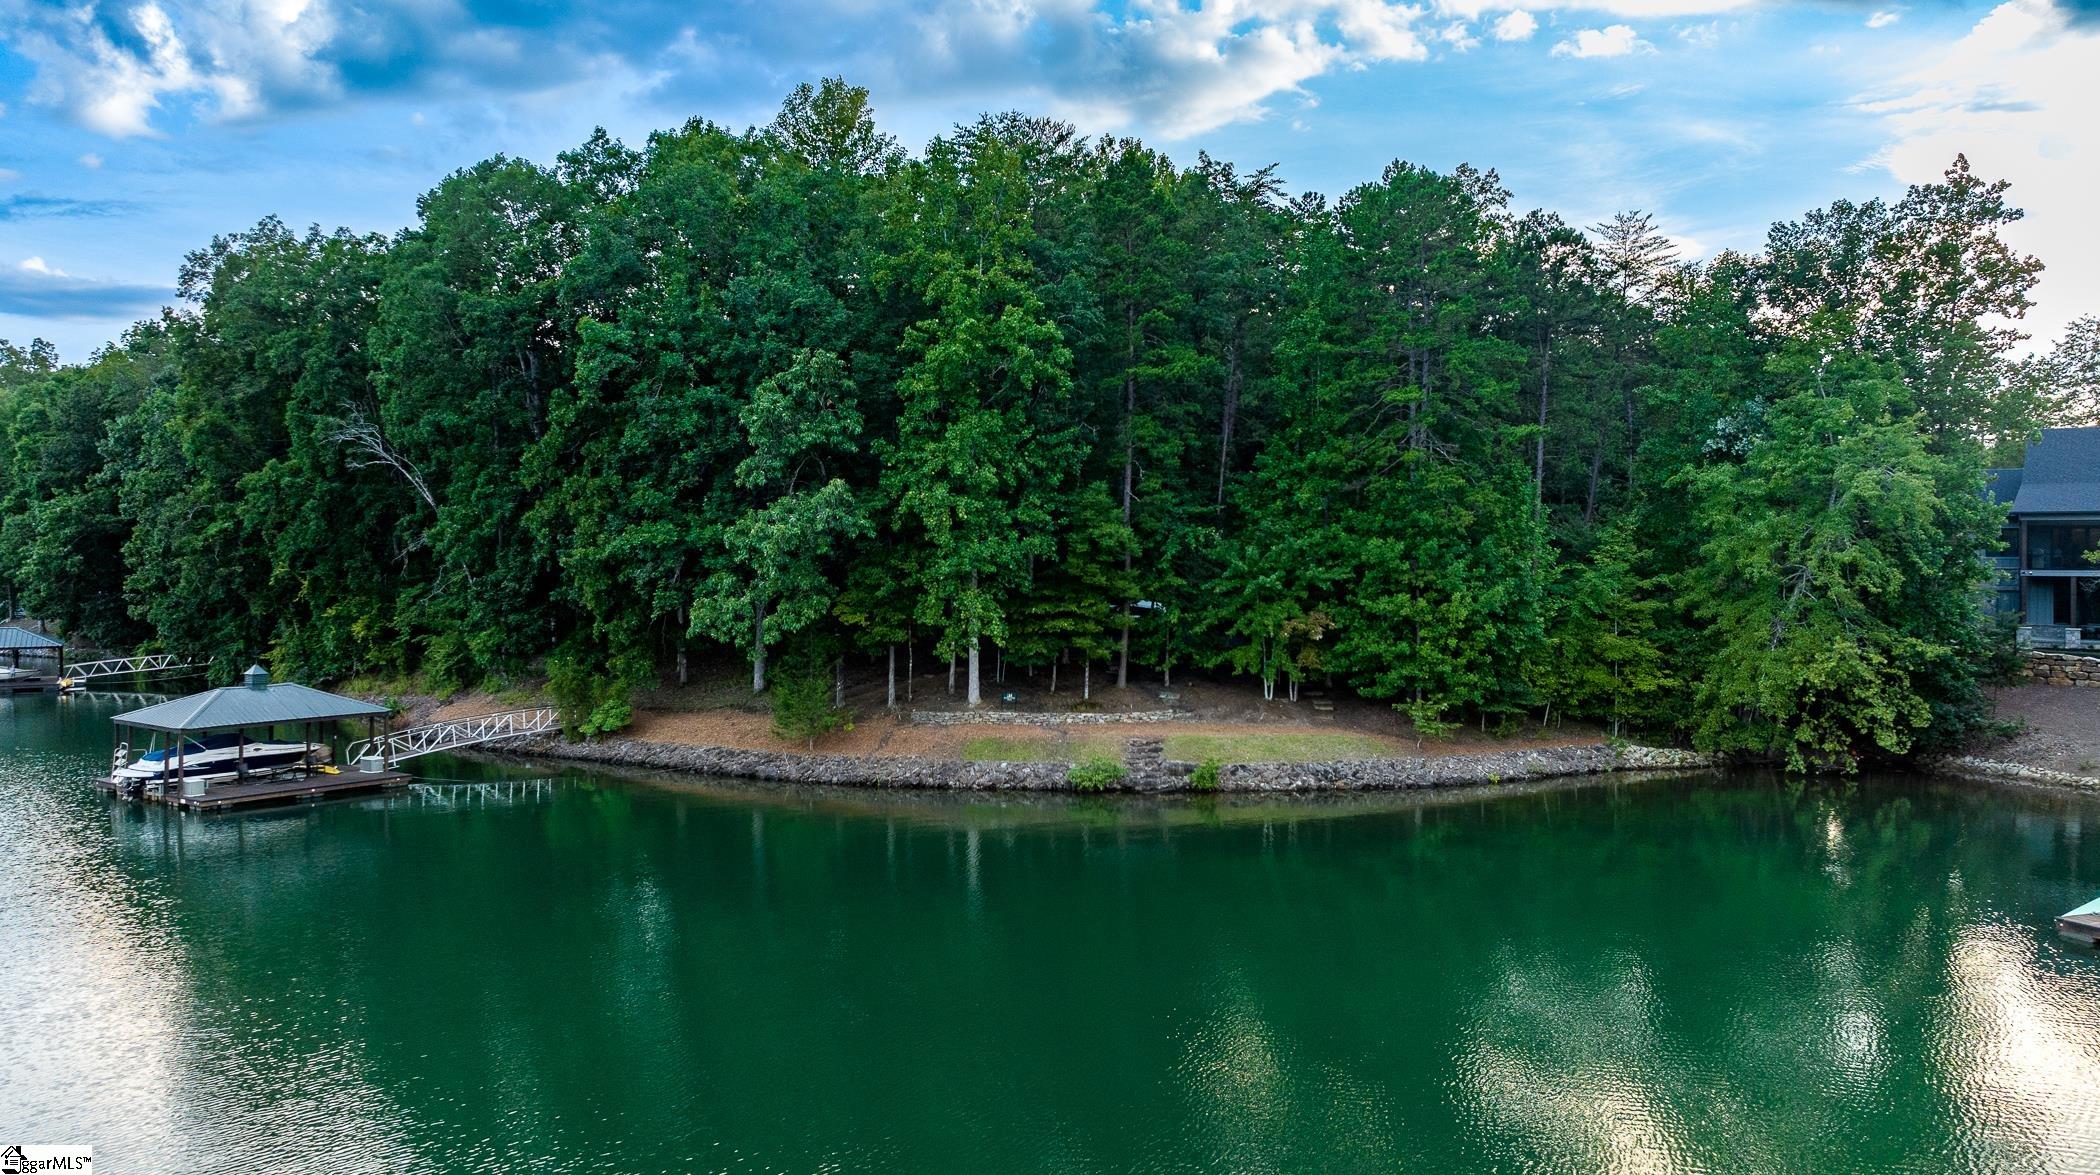 126 Bright Water Trail is situated on one of the more secluded coves in the Cliffs at Keowee Springs, and this 1.69-acre property is a build-ready spot for the home of your dreams. Located in one of the most desirable areas in the Springs, it combines a tranquil setting typically less traveled by boat traffic with a long channel view, culminating with the sight of “the farm” off channel’s end, a local boating landmark. A wonderful place for your family to float off the dock, swim, paddle board, kayak or fish.   The site is gently sloped to the water, and much of the hard work and expense is already done. This includes approx 271' of lake frontage, stone shoreline reinforcement, a temporary gravel drive for access, a dock with a boat lift approved by Duke Energy, as well as water and electric utilities installed. Its location offers excellent options for your home site that will take full advantage of this pristine location. It also enjoys deep water, with the stern of your boat typically sitting over roughly 15 feet of water when docked.  With the recent amenities and expansion of facilities (new clubhouse opening soon) at the Springs, and the outstanding qualities and pre-work completed on this site, this property makes a strong case for anyone who wants to experience quality living in a great community.  With multiple homes, the current owners have enjoyed this location for years of lakefront memories but are ready to relinquish it to the next owner. For the golfer, the boater, the extended family or as a future retirement haven, 126 Bright Water Trail has all the ingredients that the Cliffs at Keowee Springs has to offer. A right to purchase a Cliffs Club membership is available.  **Boat is not included with the property.**